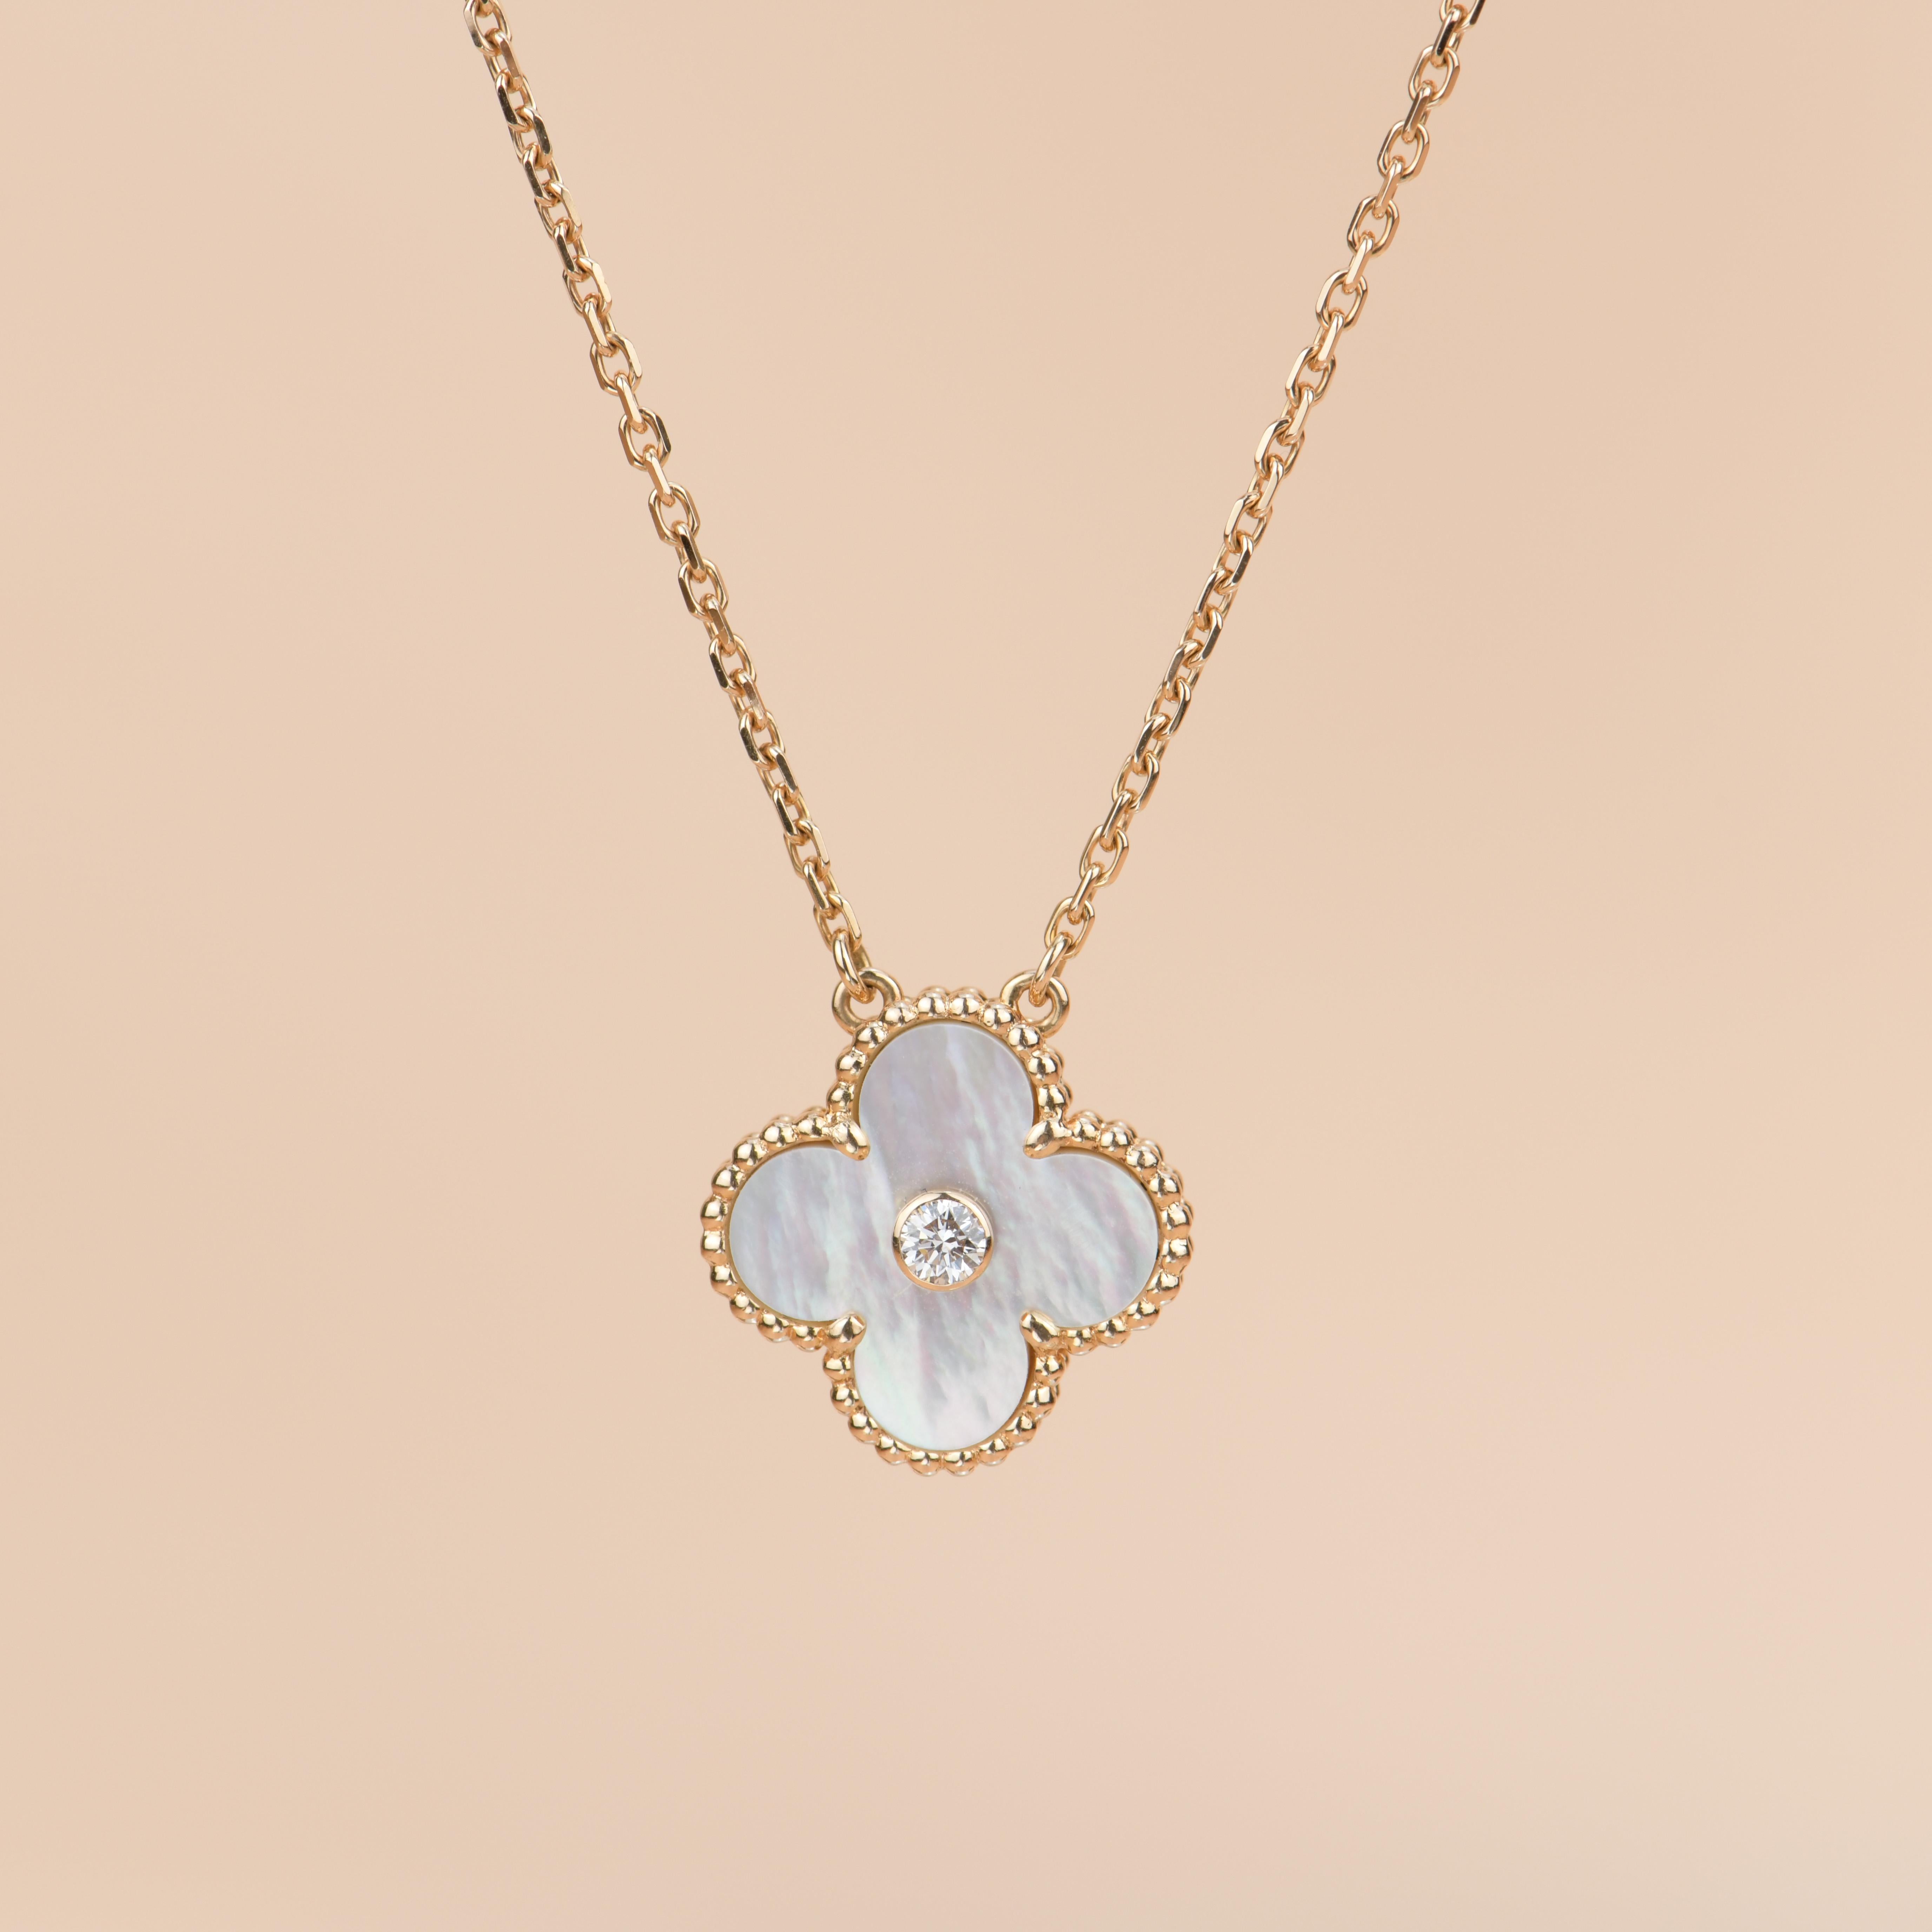 18k Rose Gold Limited Edition Mother Of Pearl Necklace was released in 2012 Christmas as the holiday pendant. VCA doesn't create this version anymore, truly collective piece!

Dandelion Antiques Code:  AT-1328
Brand:  Van Cleef & Arpels
Model: 